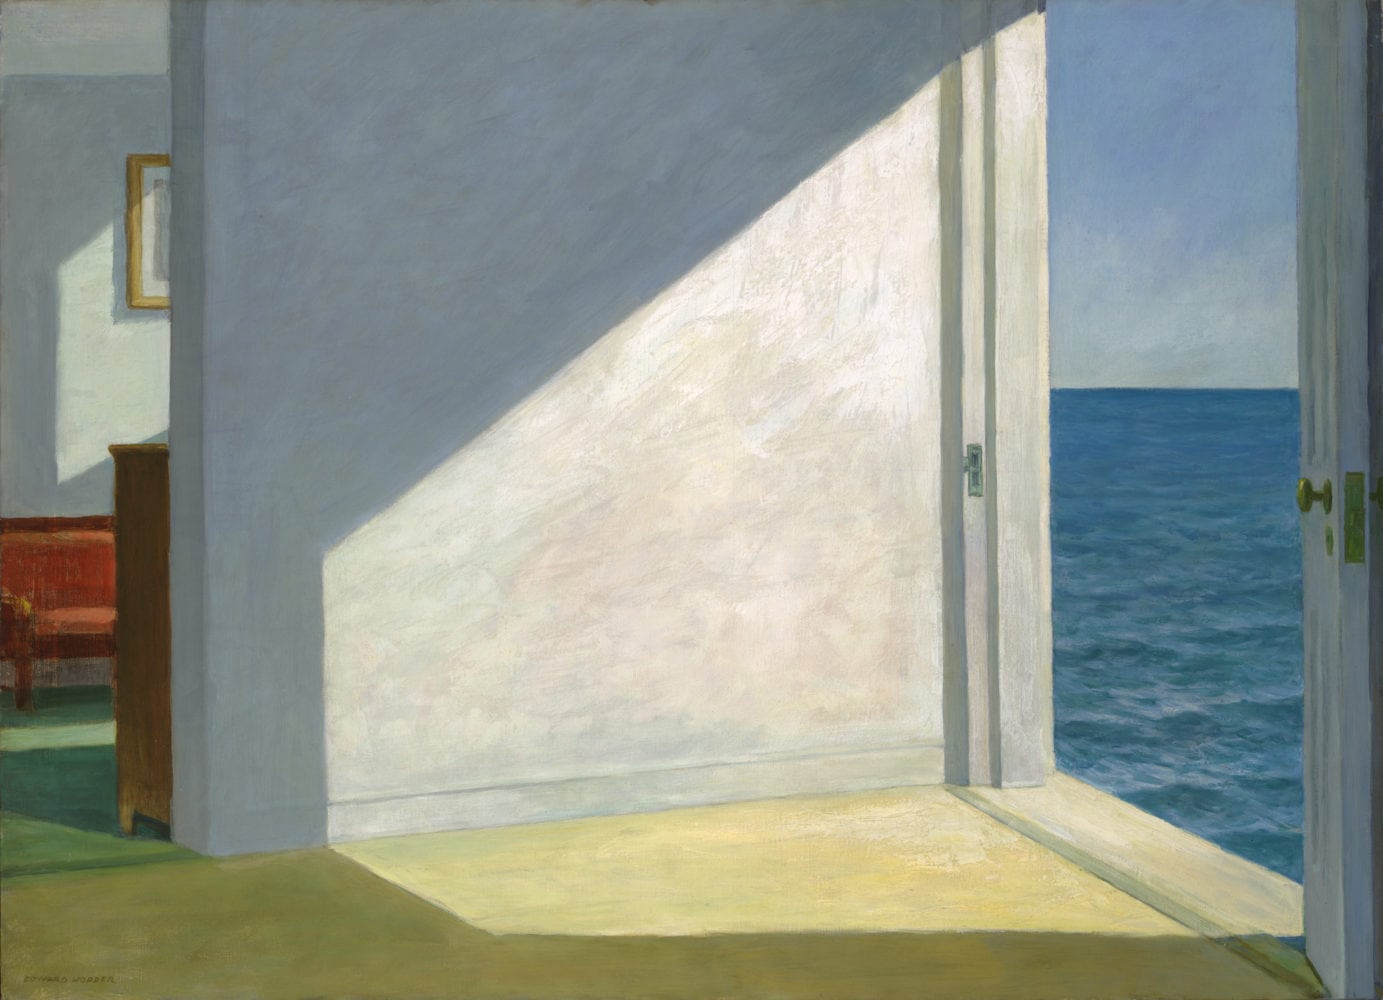 Edward Hopper Rooms by the Sea